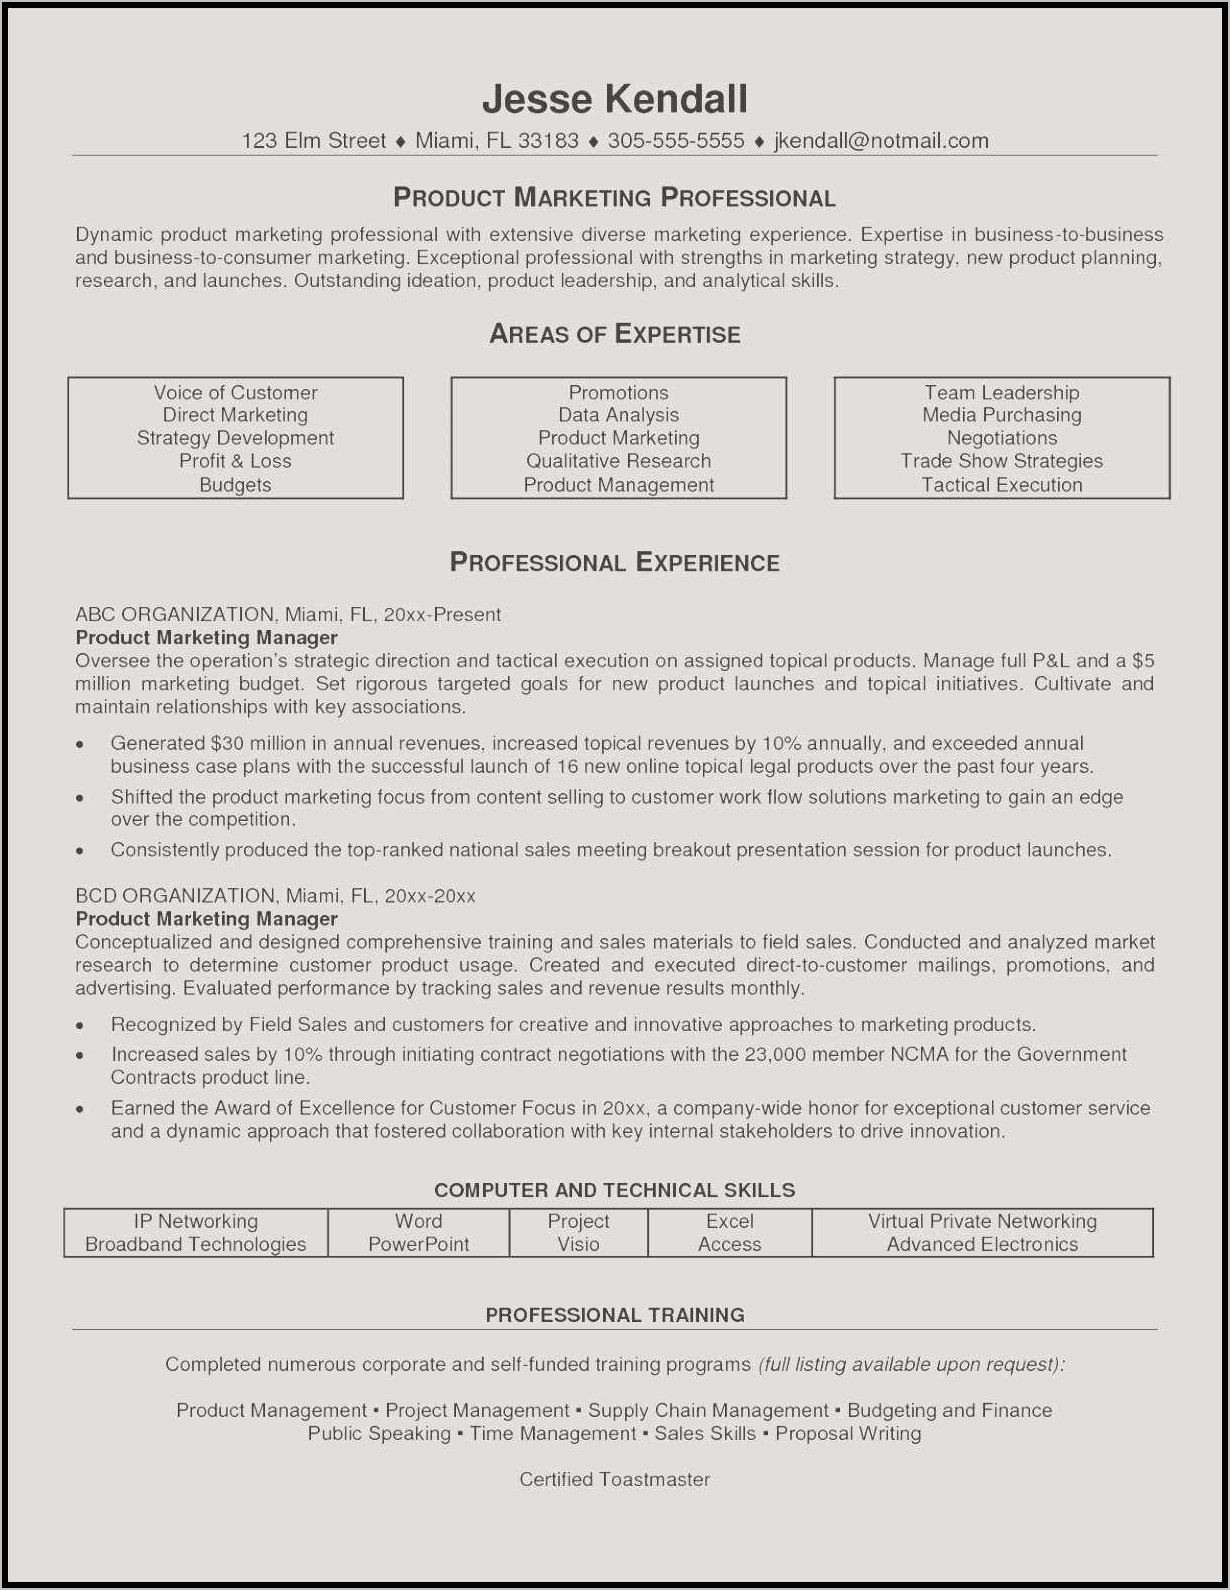 Examples Of Time Management Skills On Resume